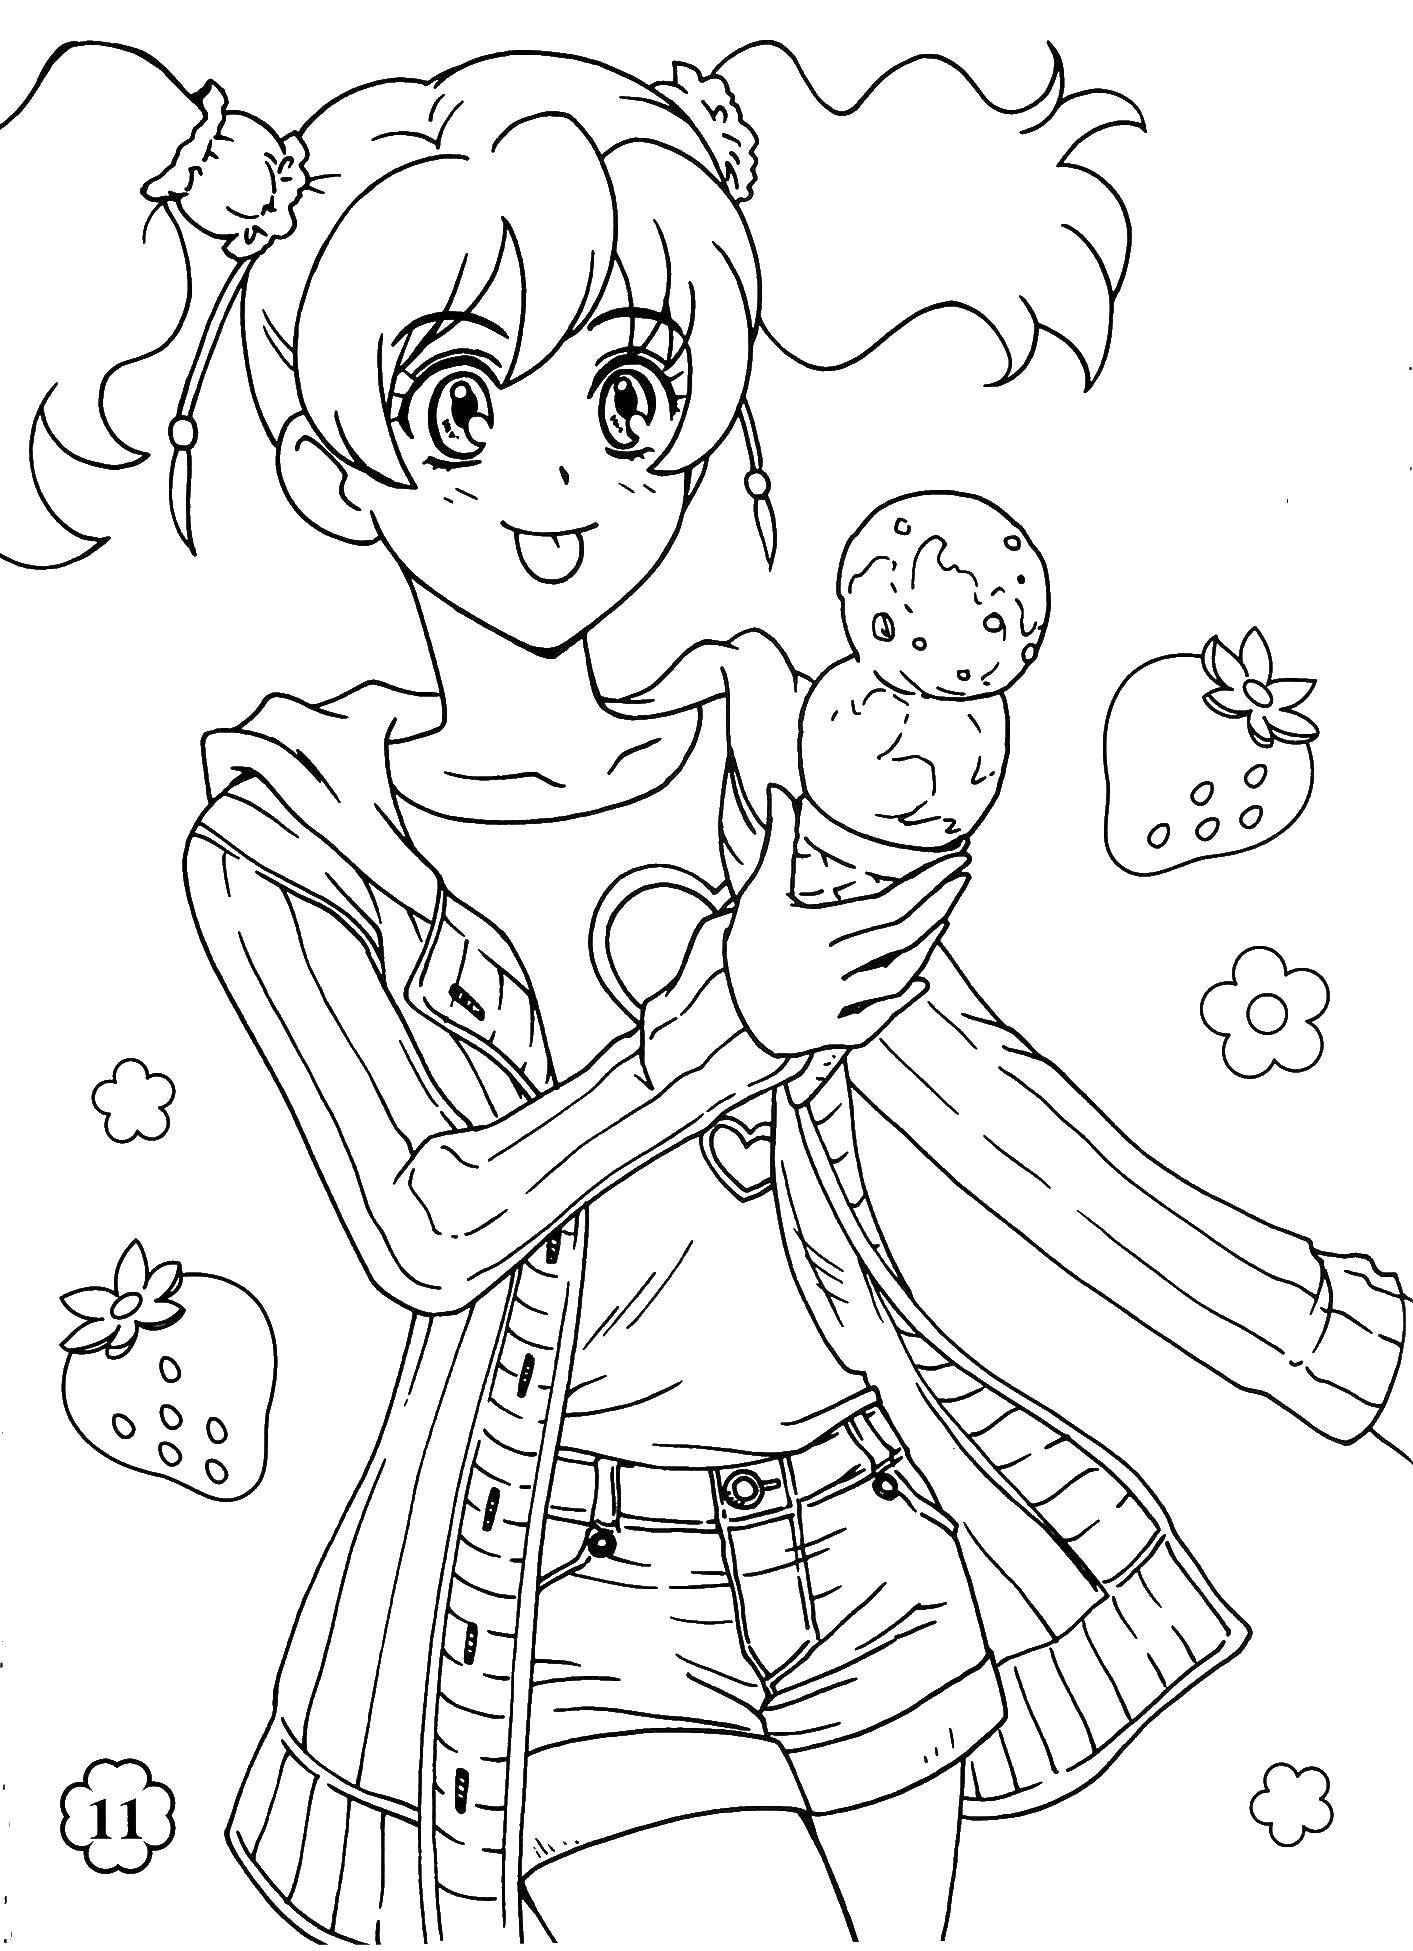 Coloring Girl with ice cream. Category anime. Tags:  anime, girl, ice cream.